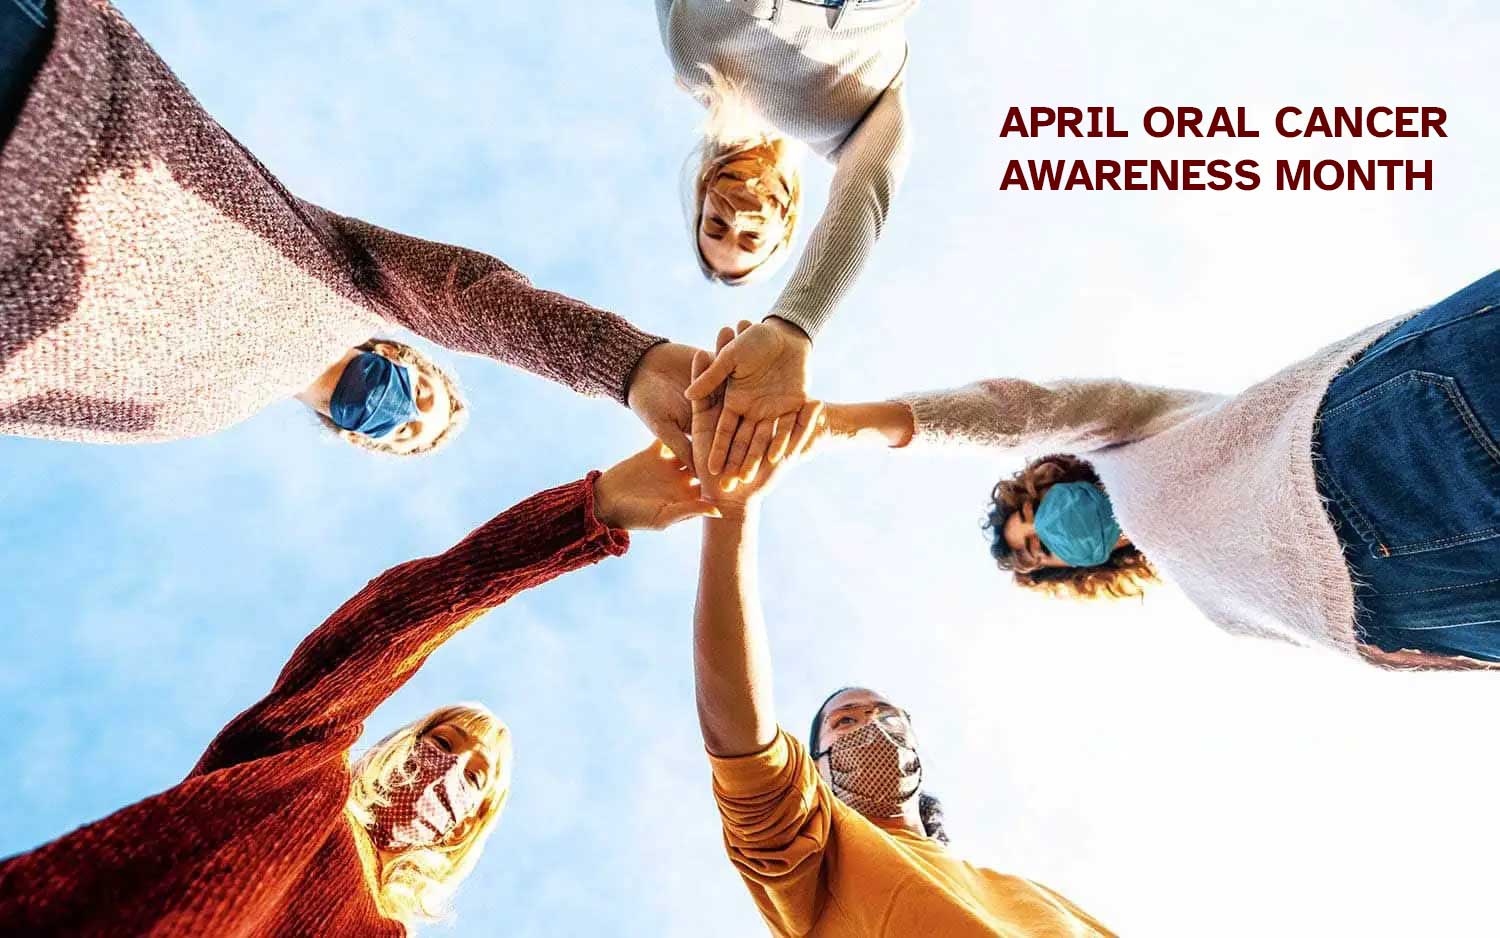 Oral Cancer Awareness Month: Spreading Knowledge and Hope